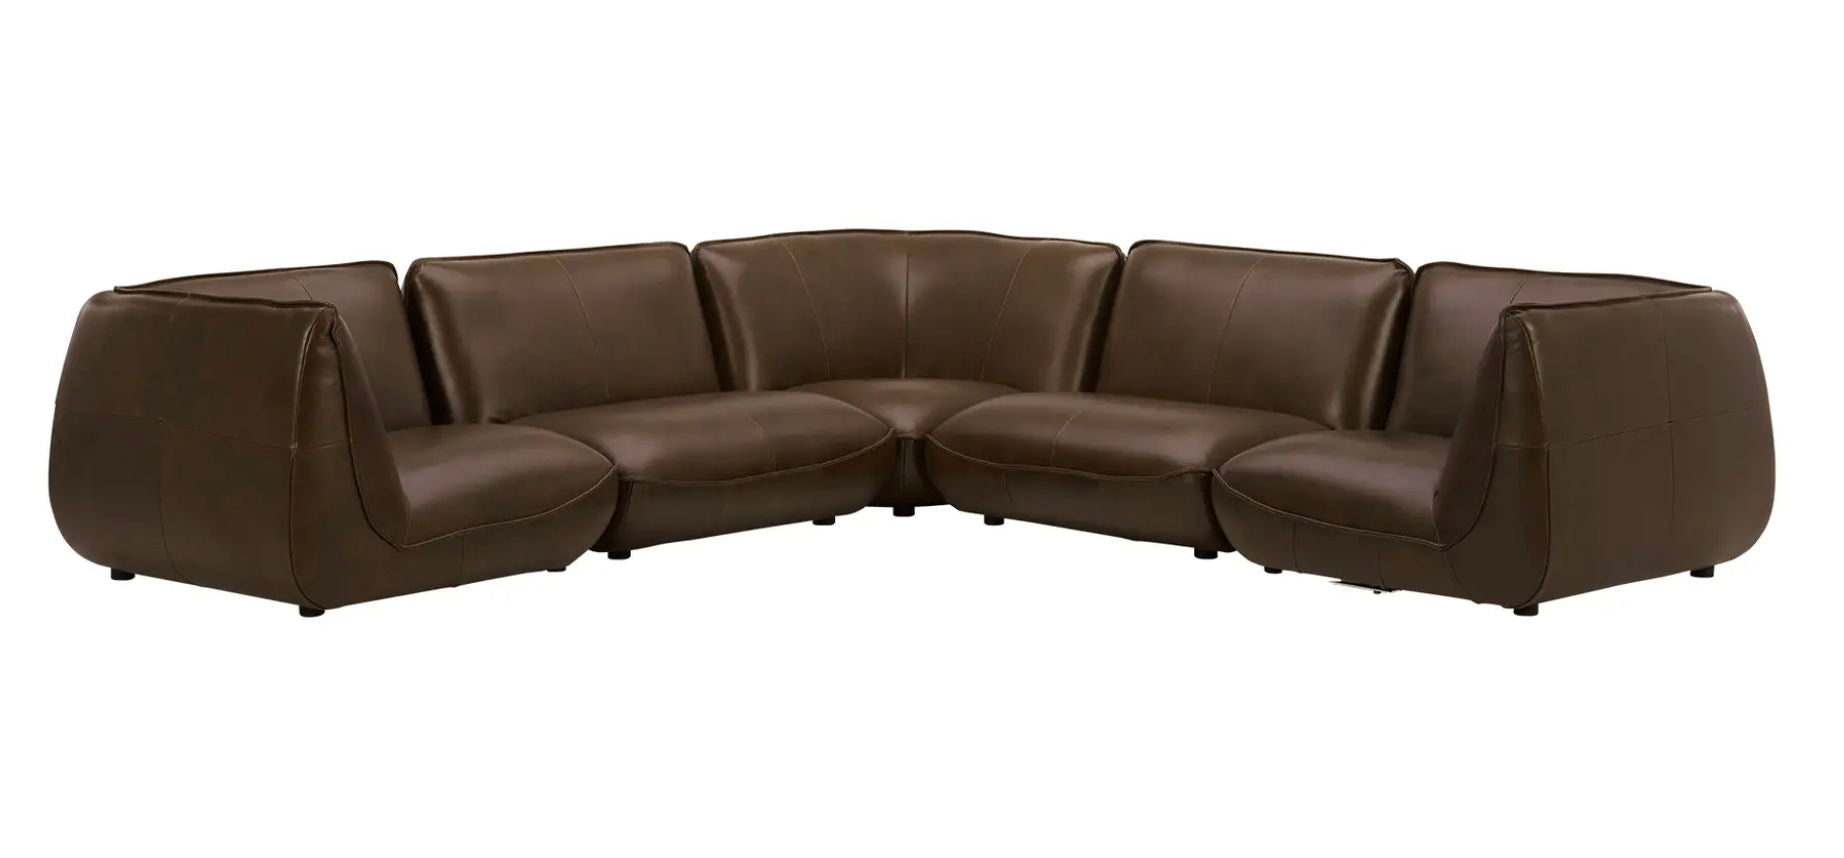 Brown Leather L-Sectional - Modular, Zeppelin Classic